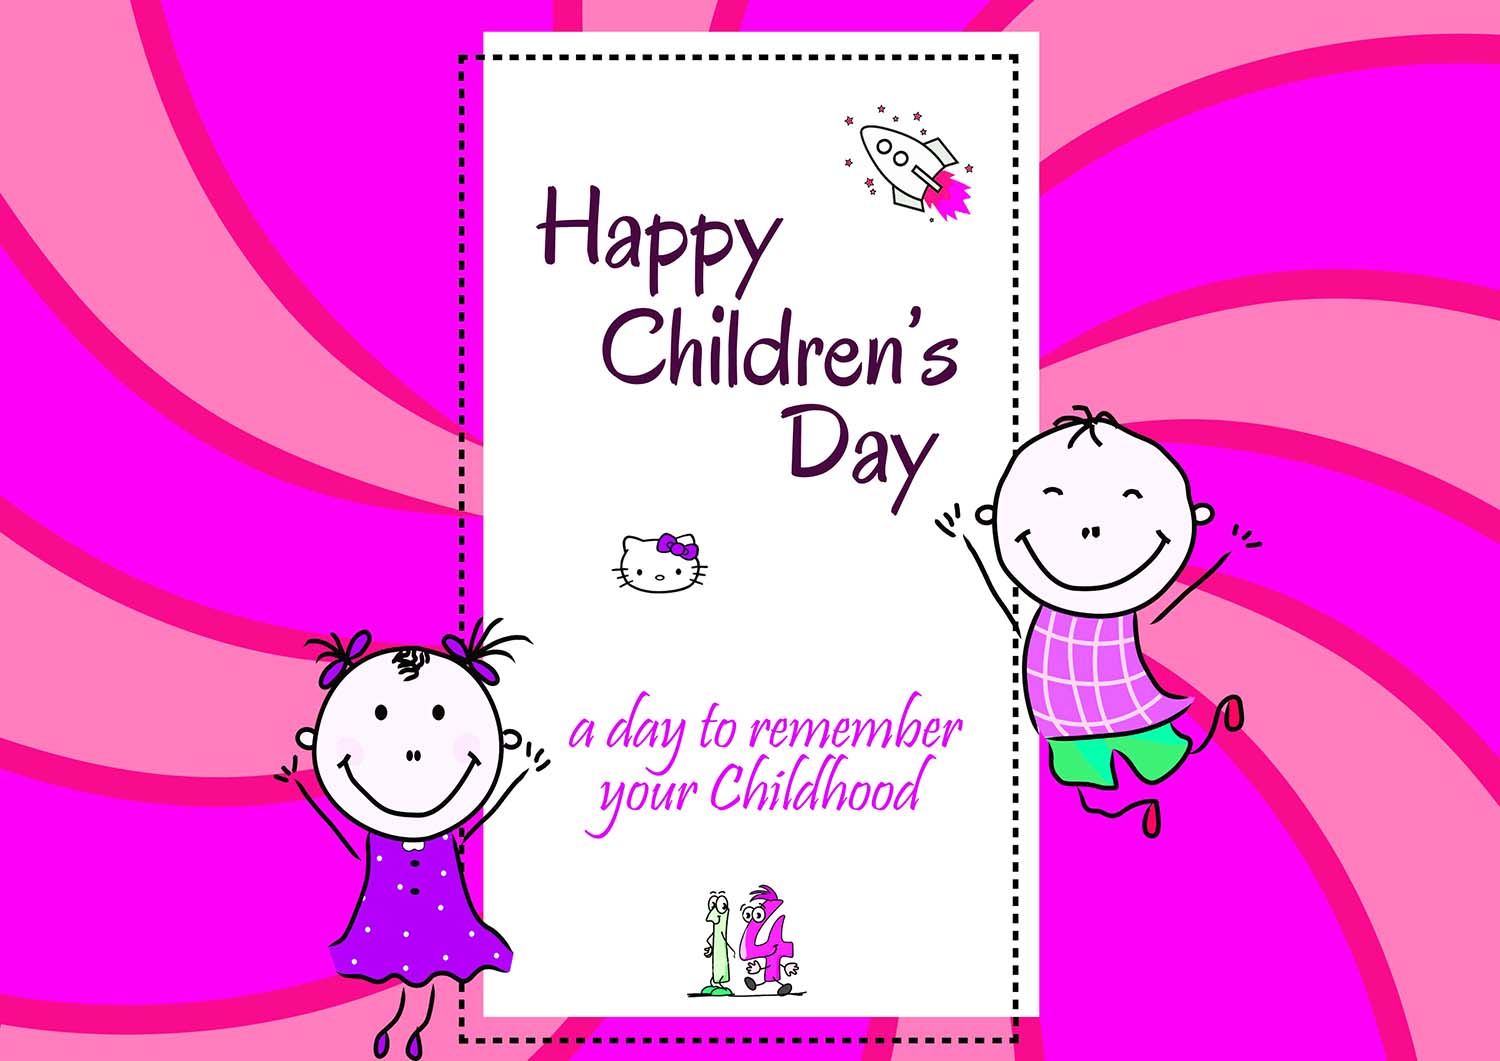 children's day messages quotes